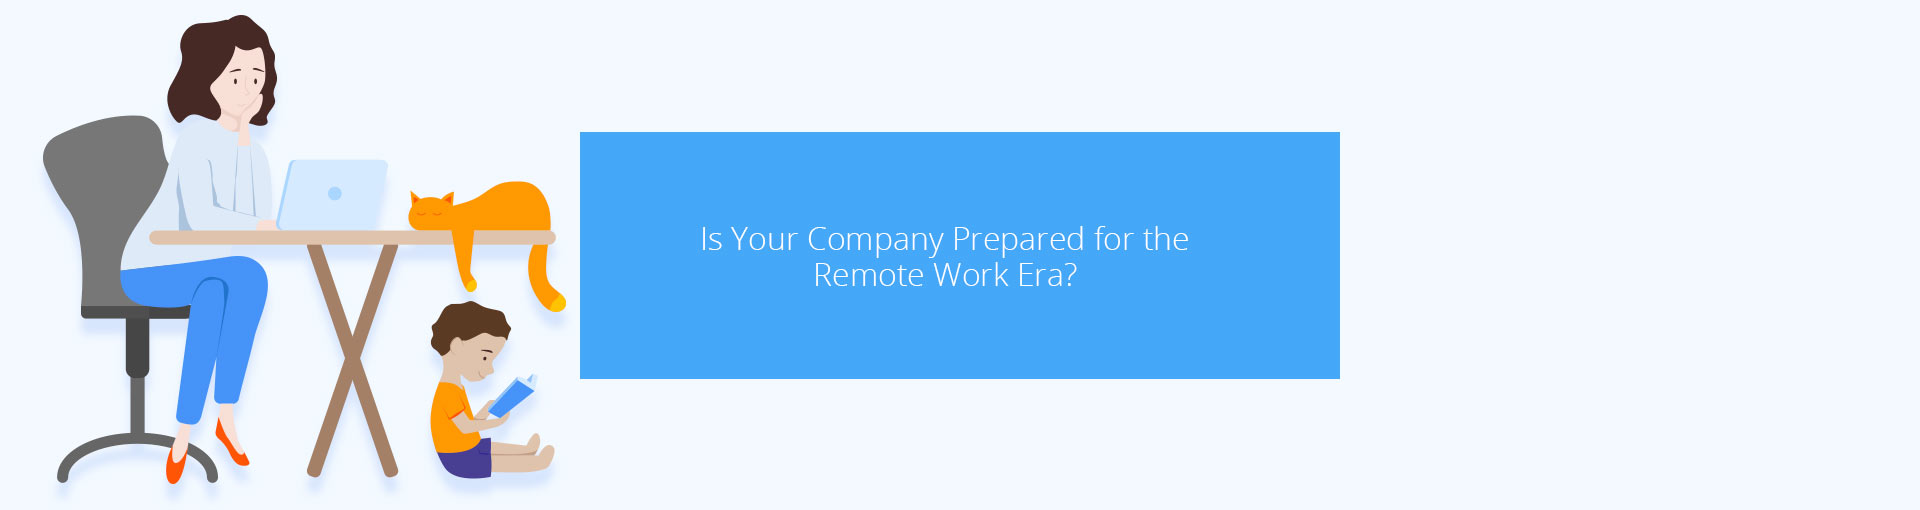 Is Your Company Prepared for the Remote Work Era? Featured Image